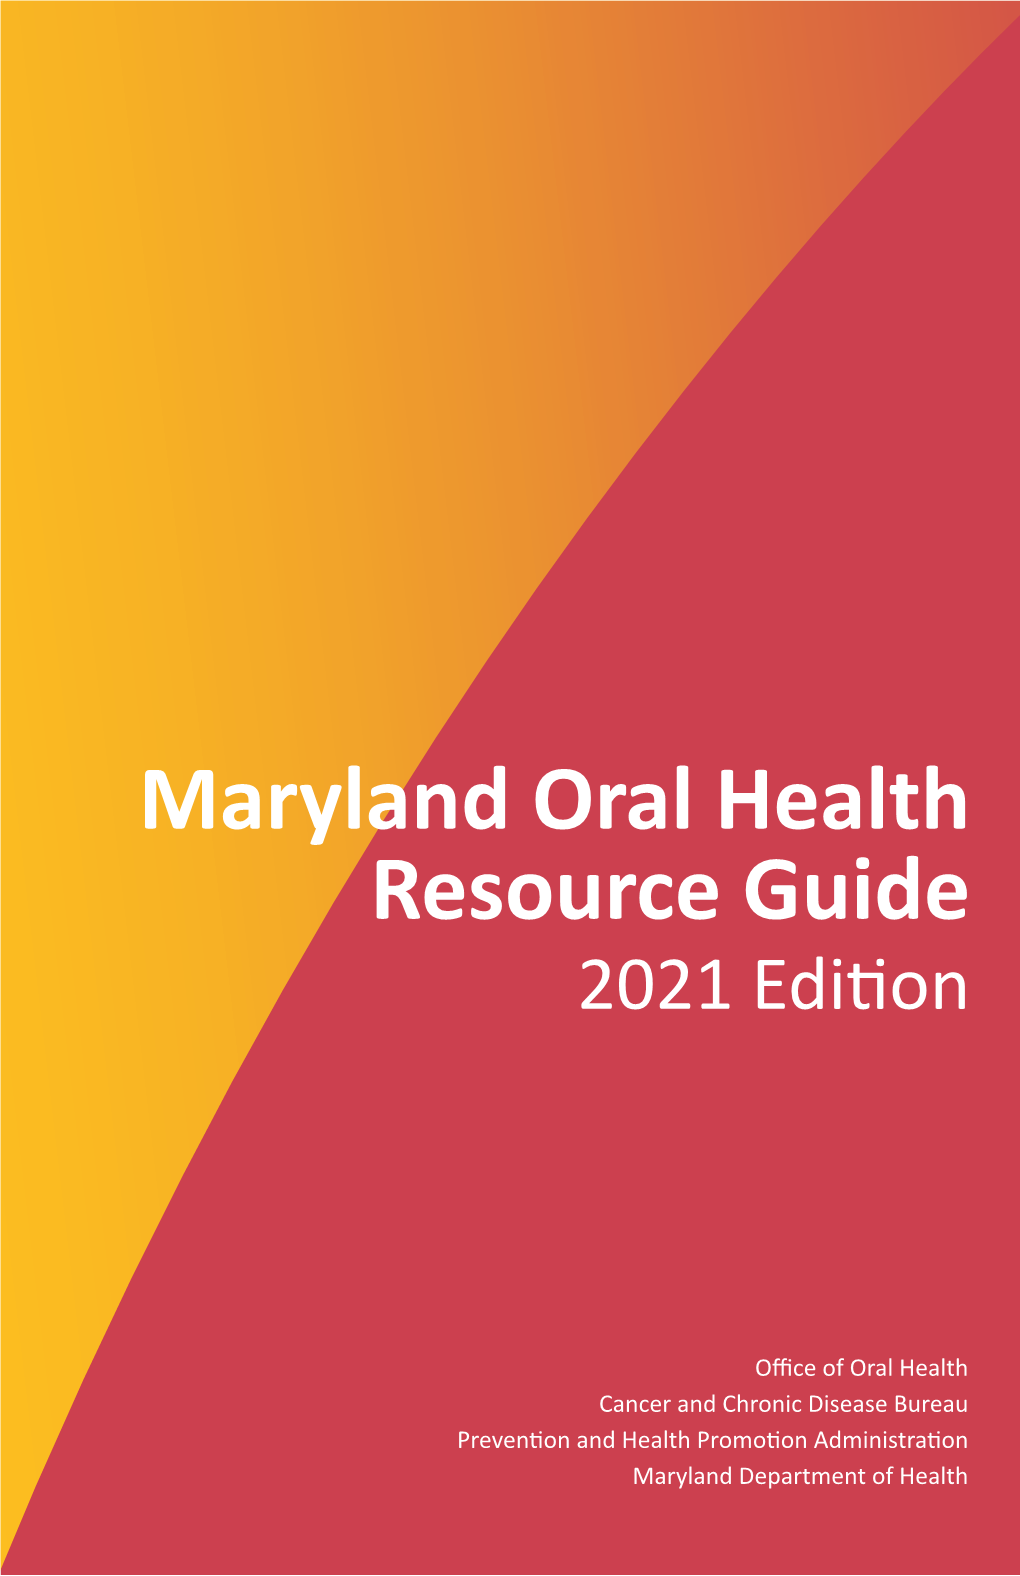 Maryland Oral Health Resource Guide 2021 Edition